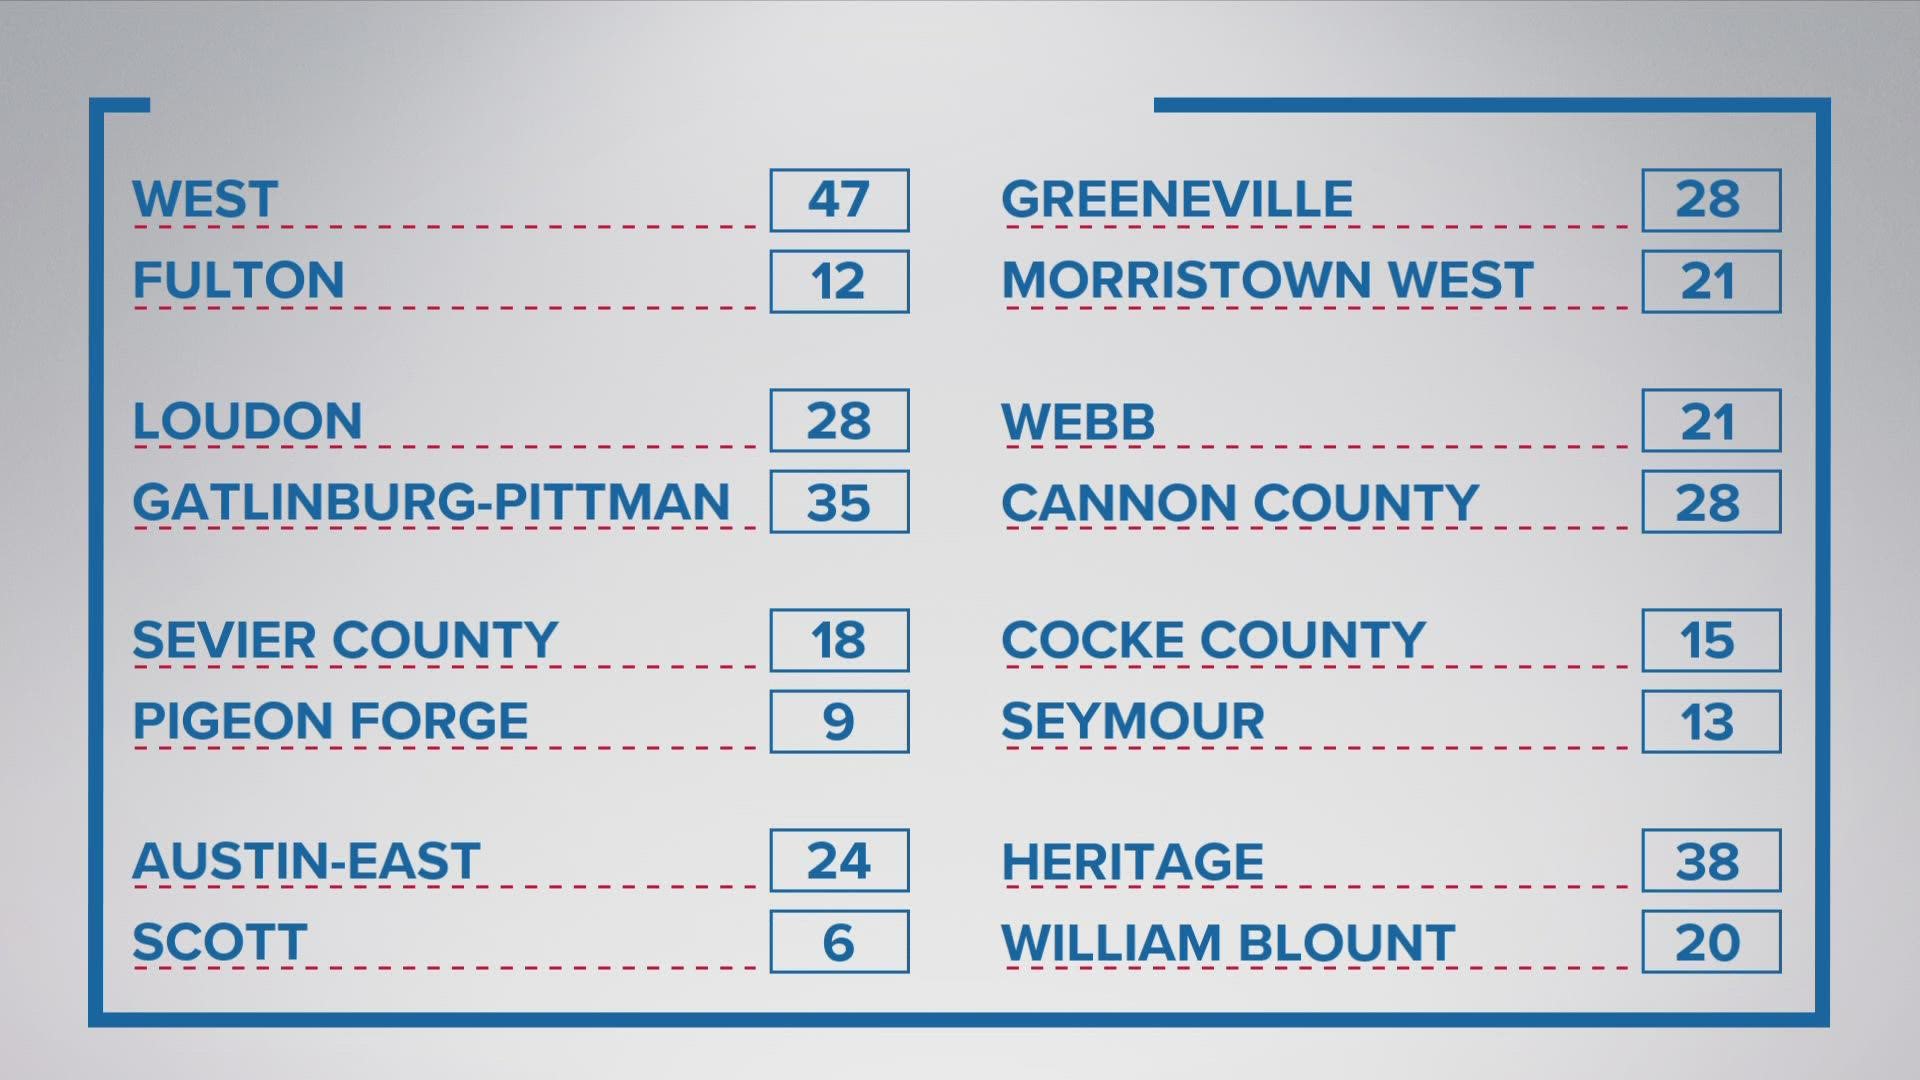 Here are the scores for most games in East Tennessee for week 4 of high school football.